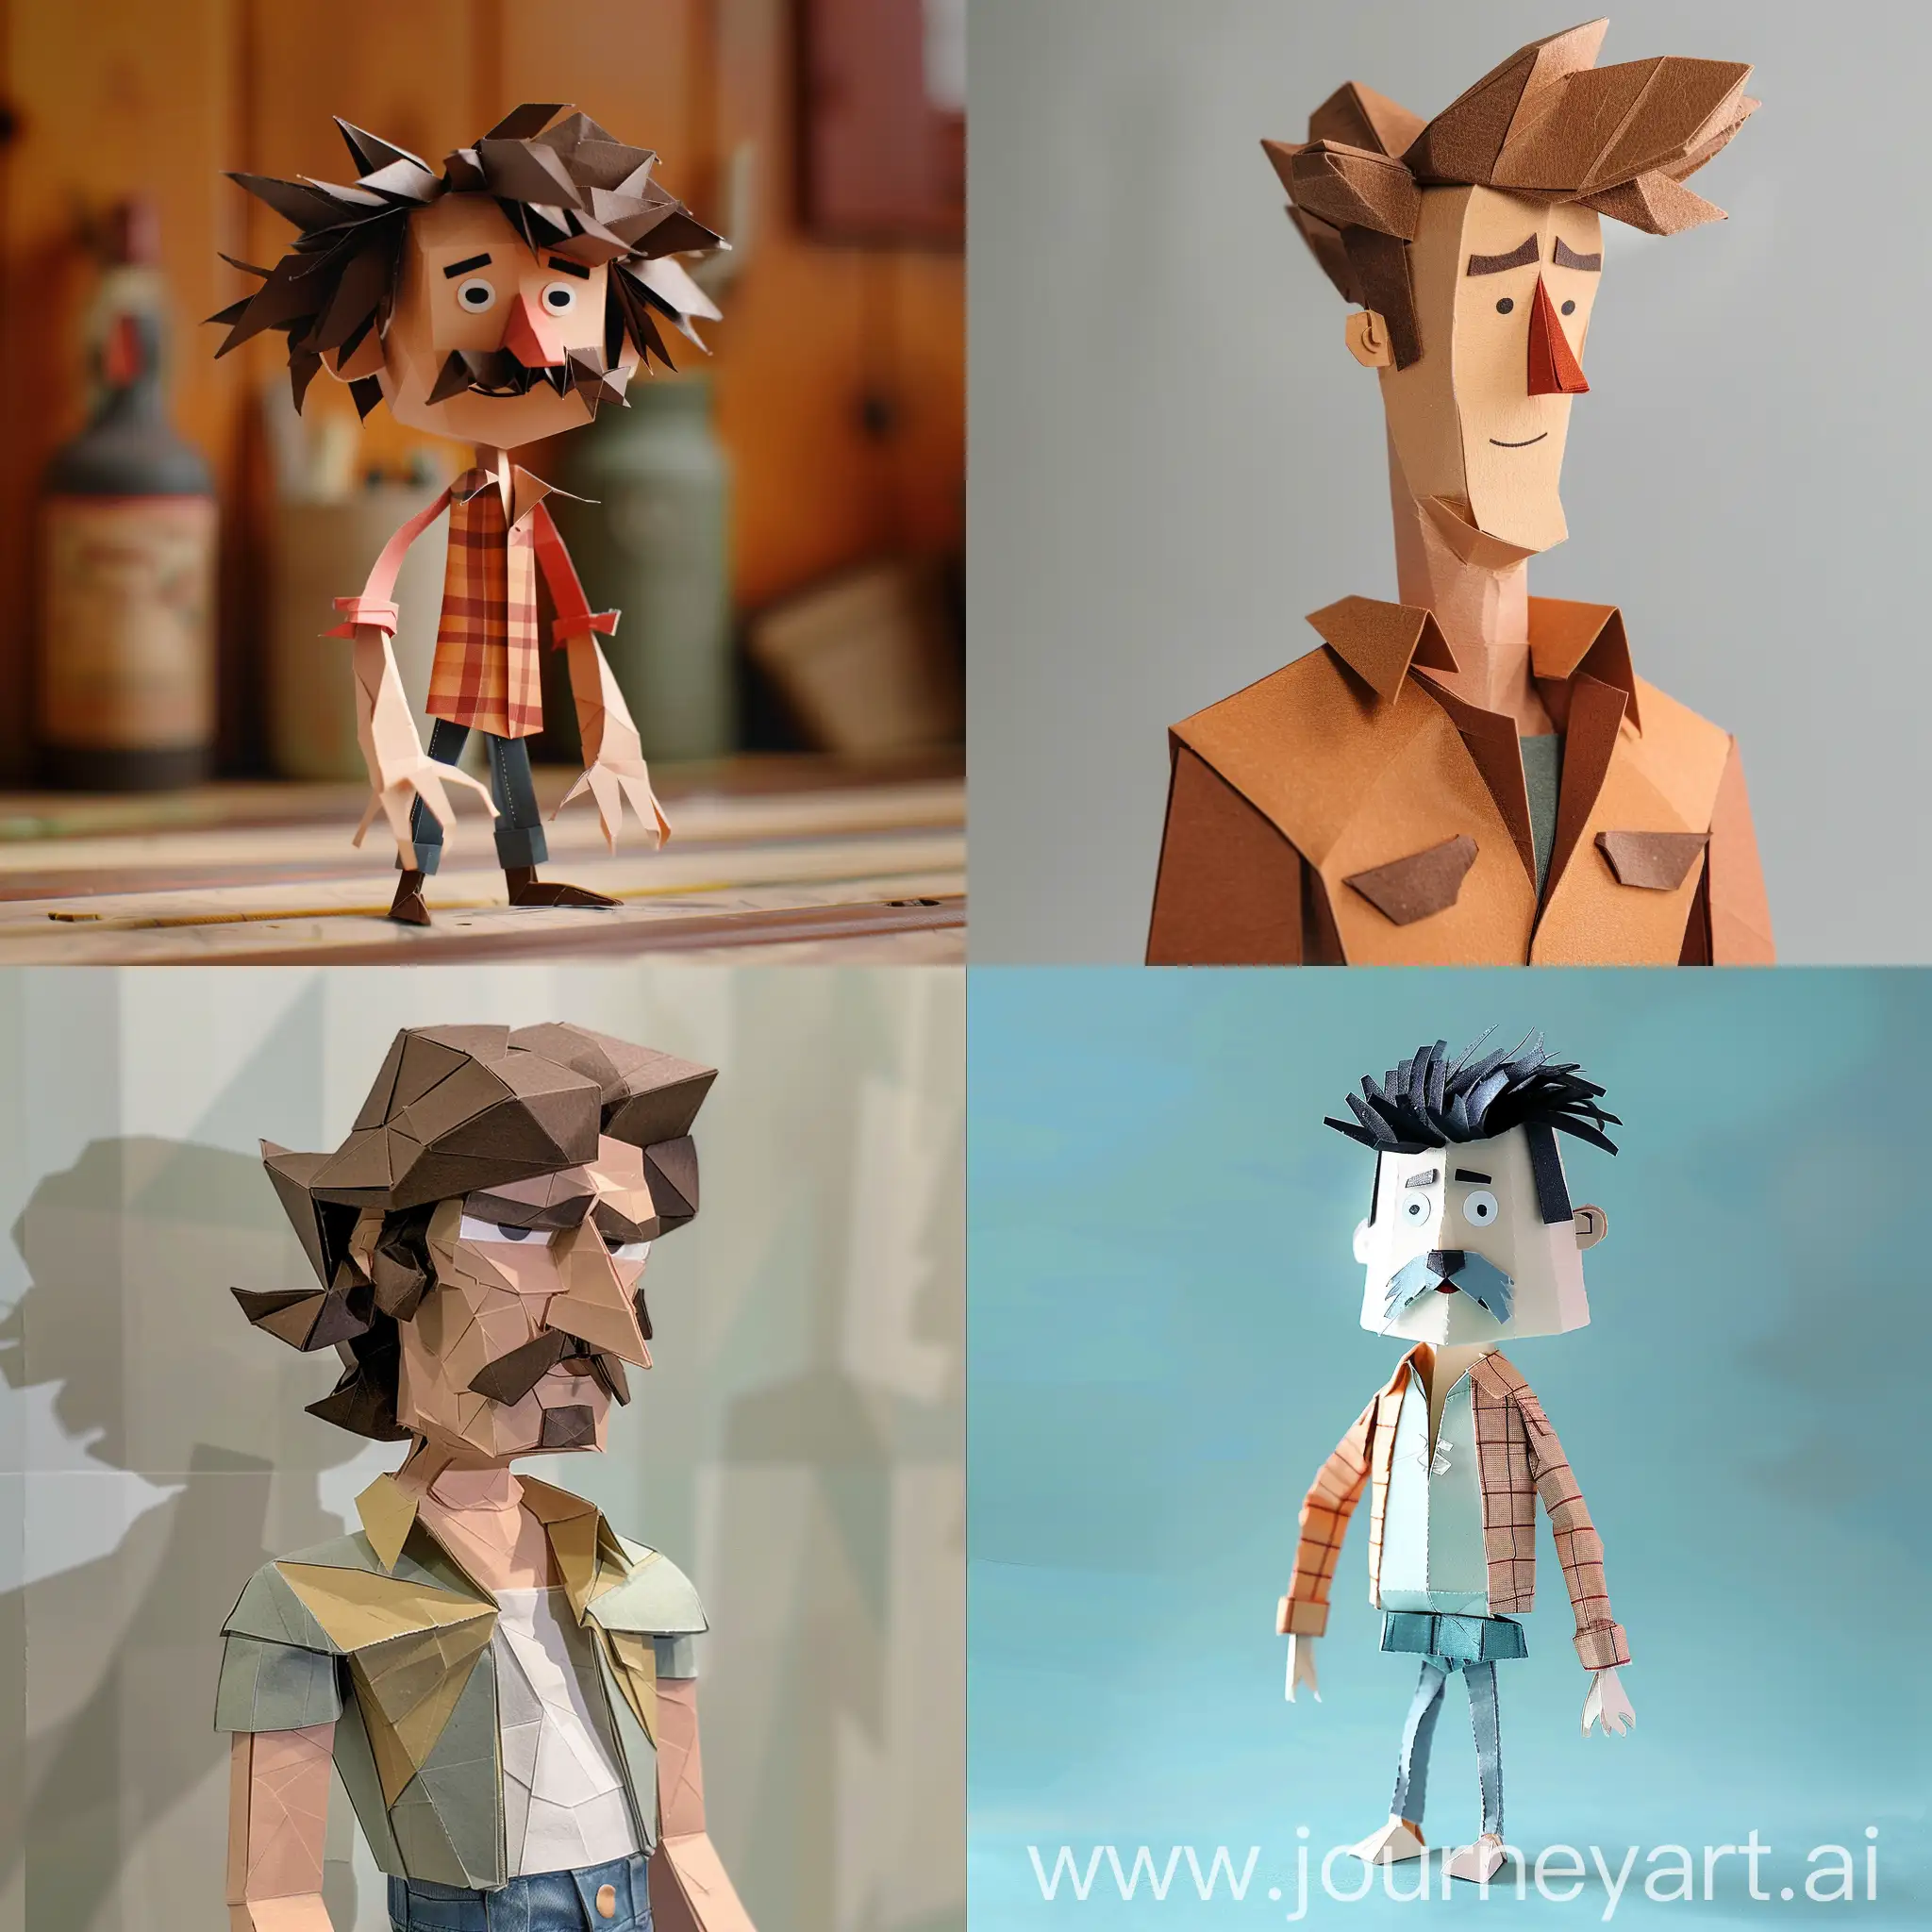       minimalist claymation character design reference turnaround sheet of a Midwest 80s mullet dad made of paper 